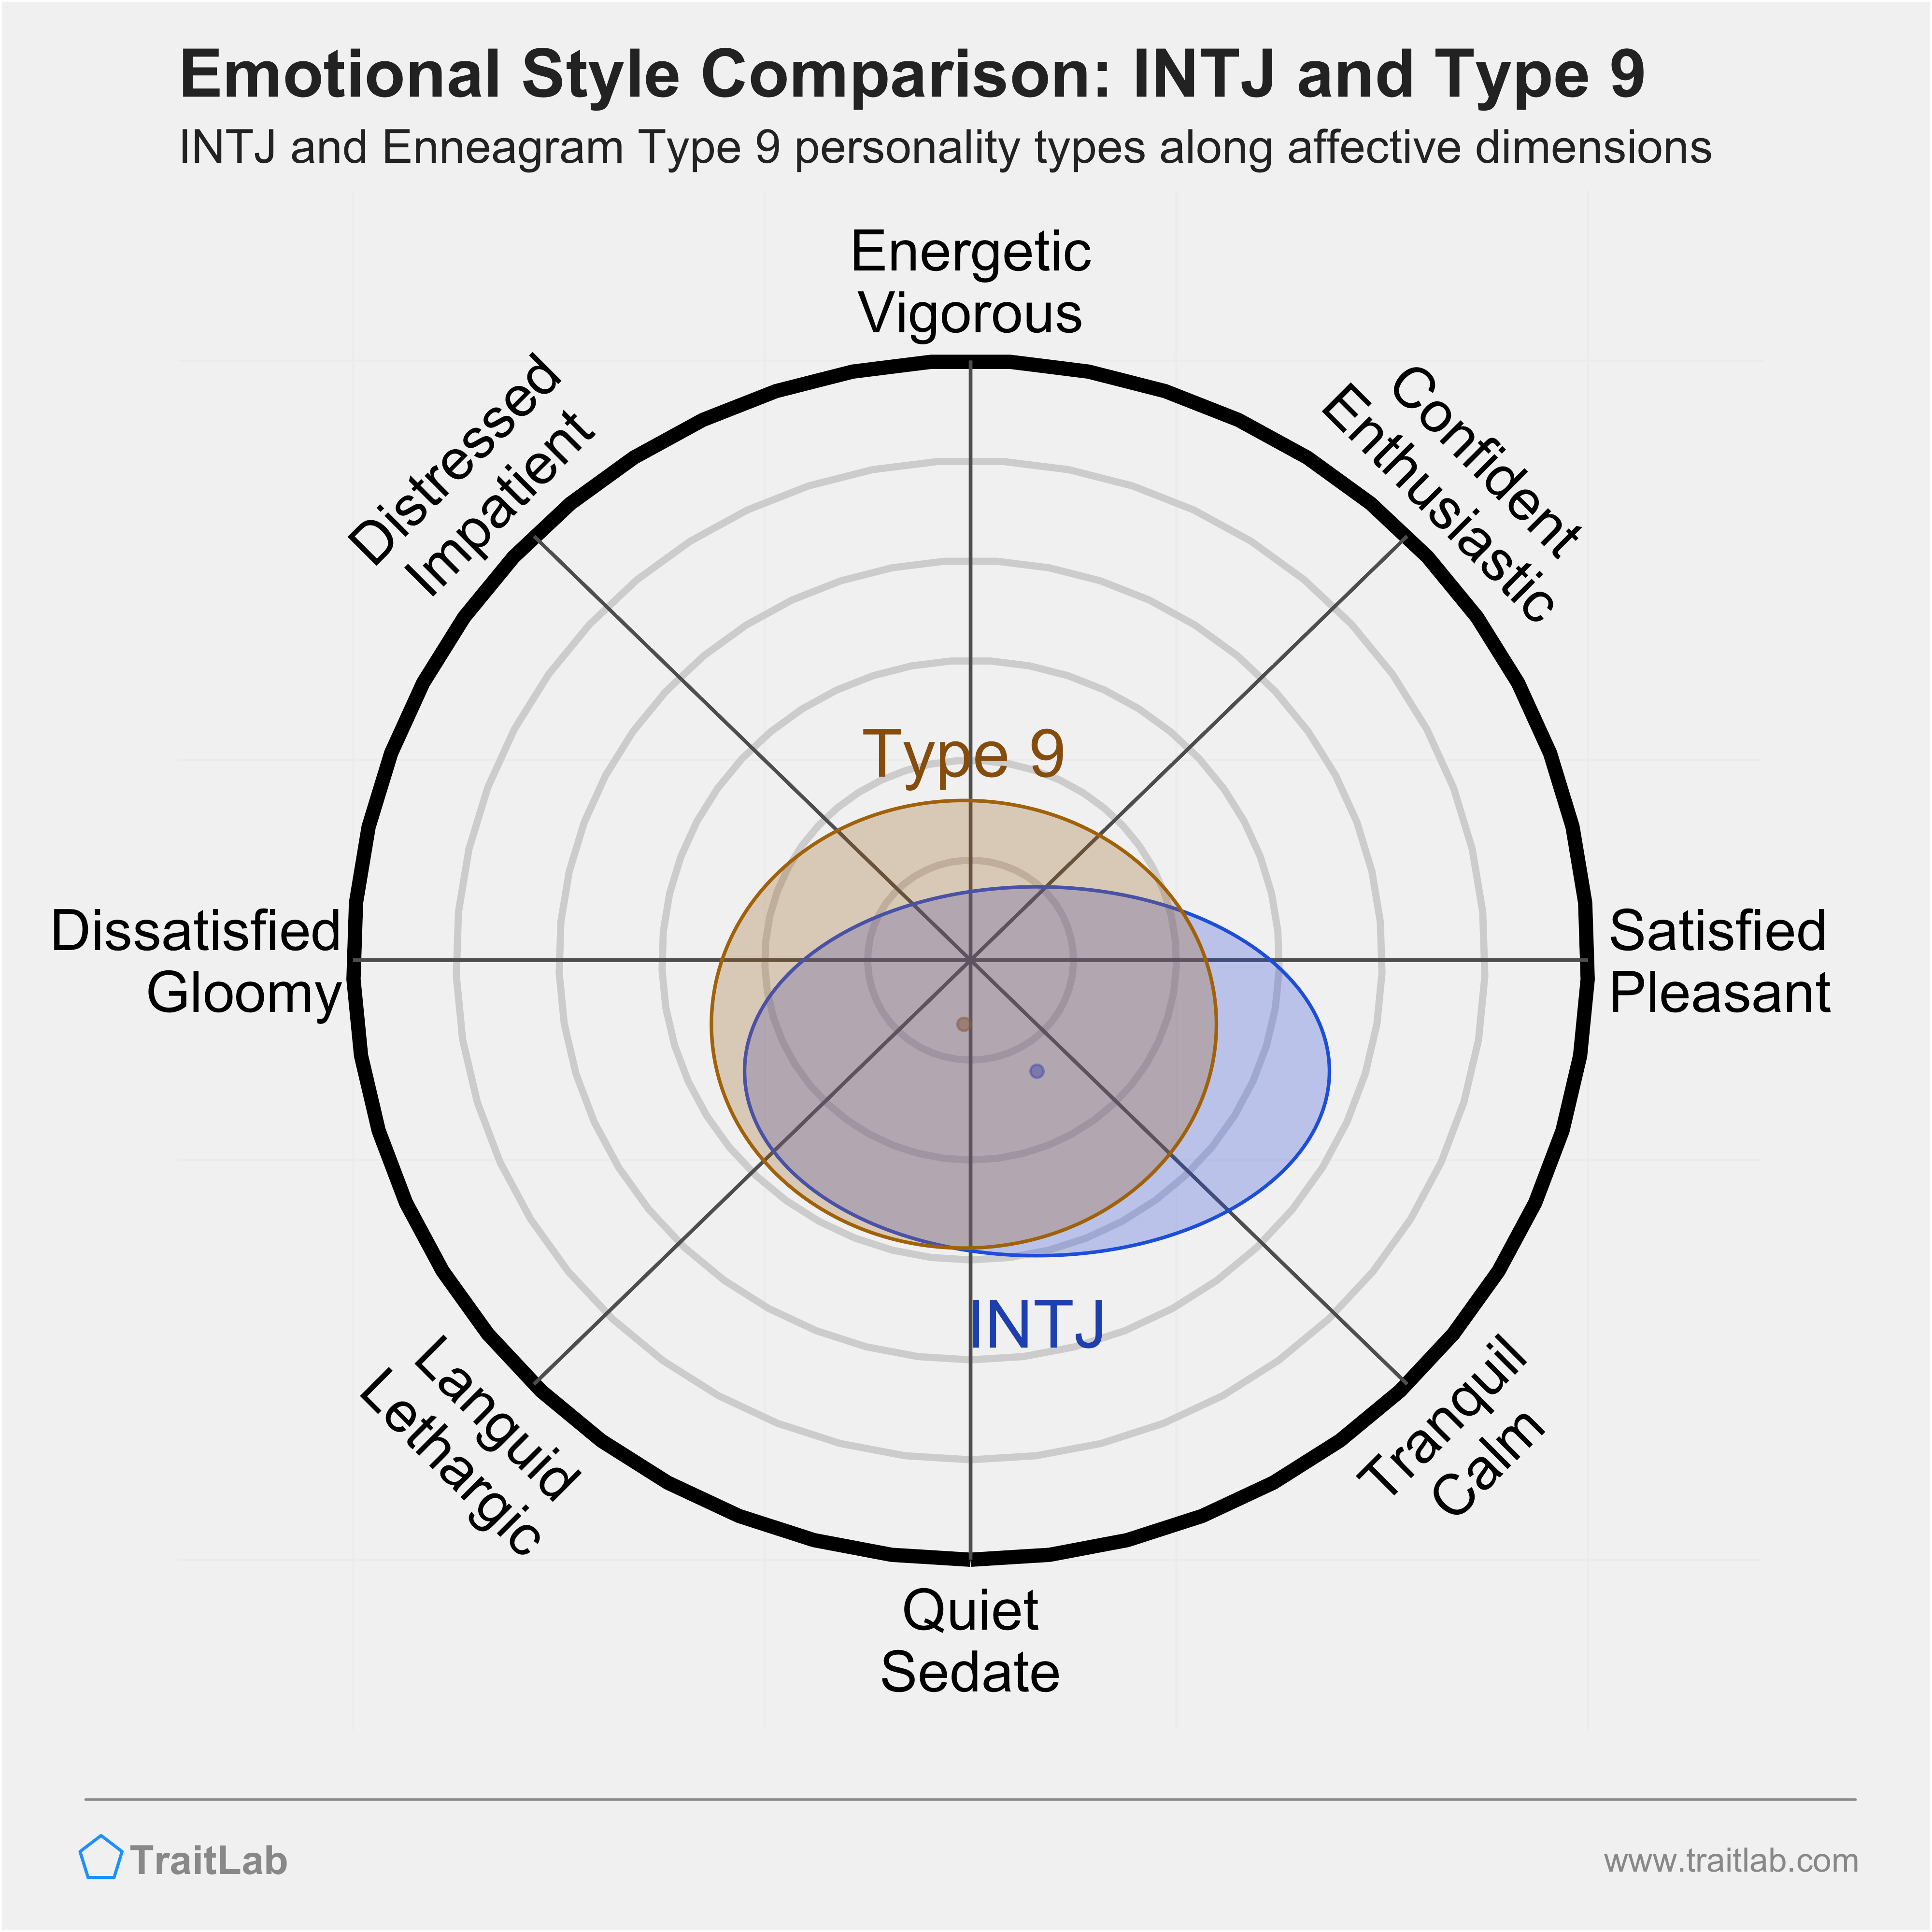 INTJ and Type 9 comparison across emotional (affective) dimensions